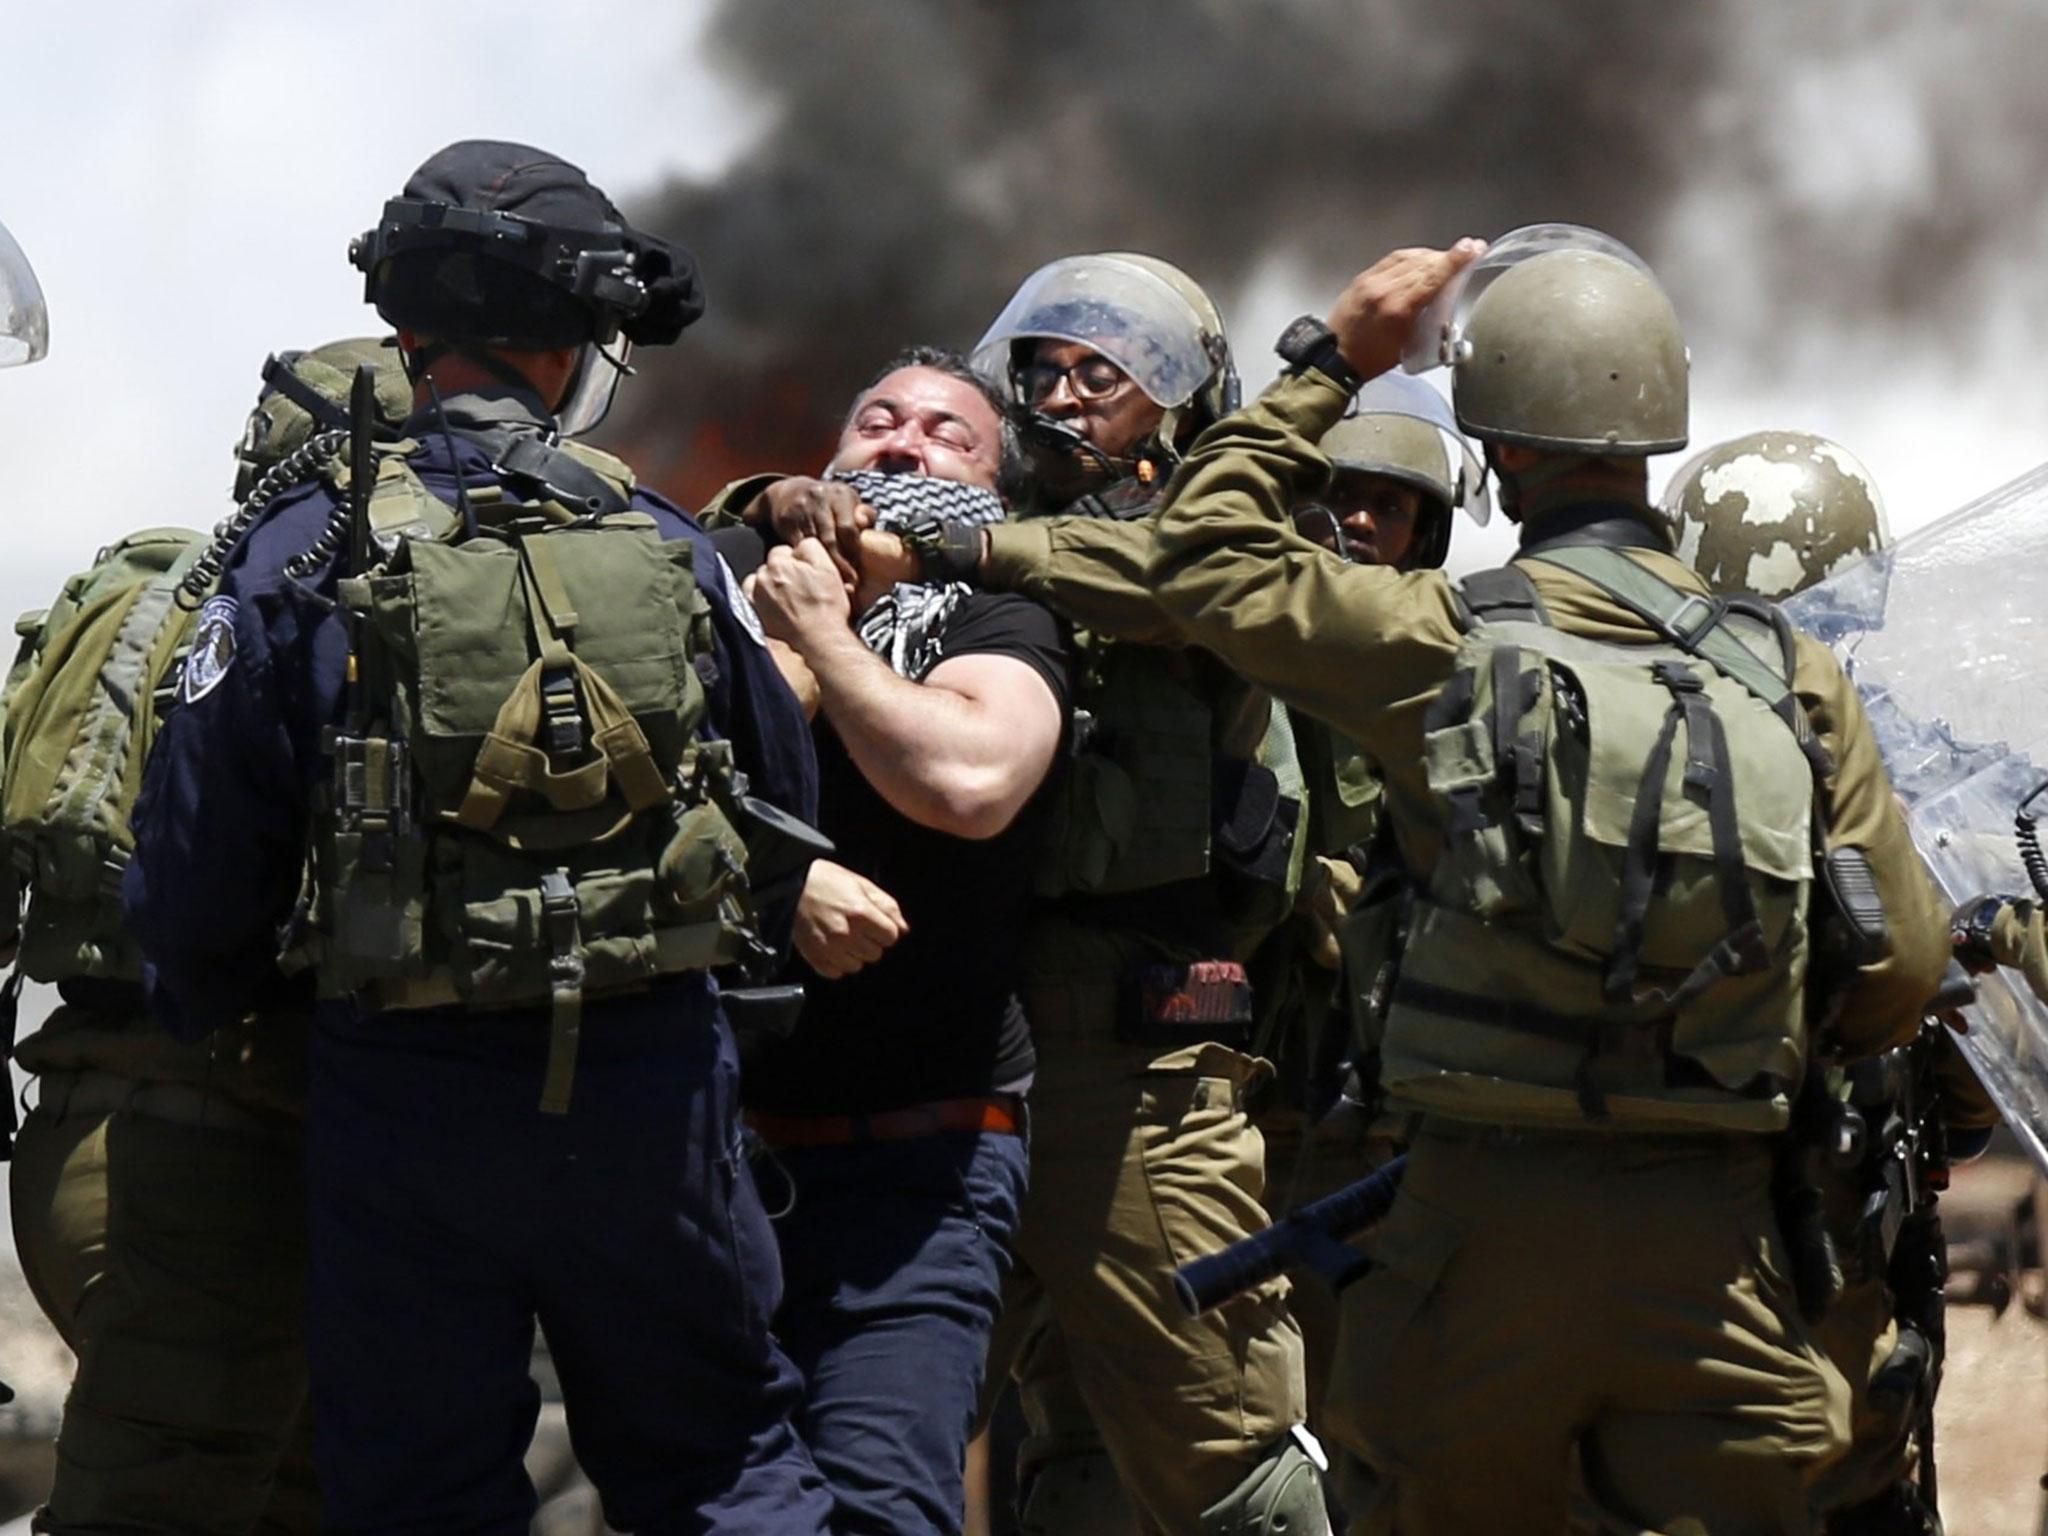 Israeli soldiers arrest a Palestinian man protesting in support of prisoners on hunger strike in Israeli jails, in the West Bank village of Beita